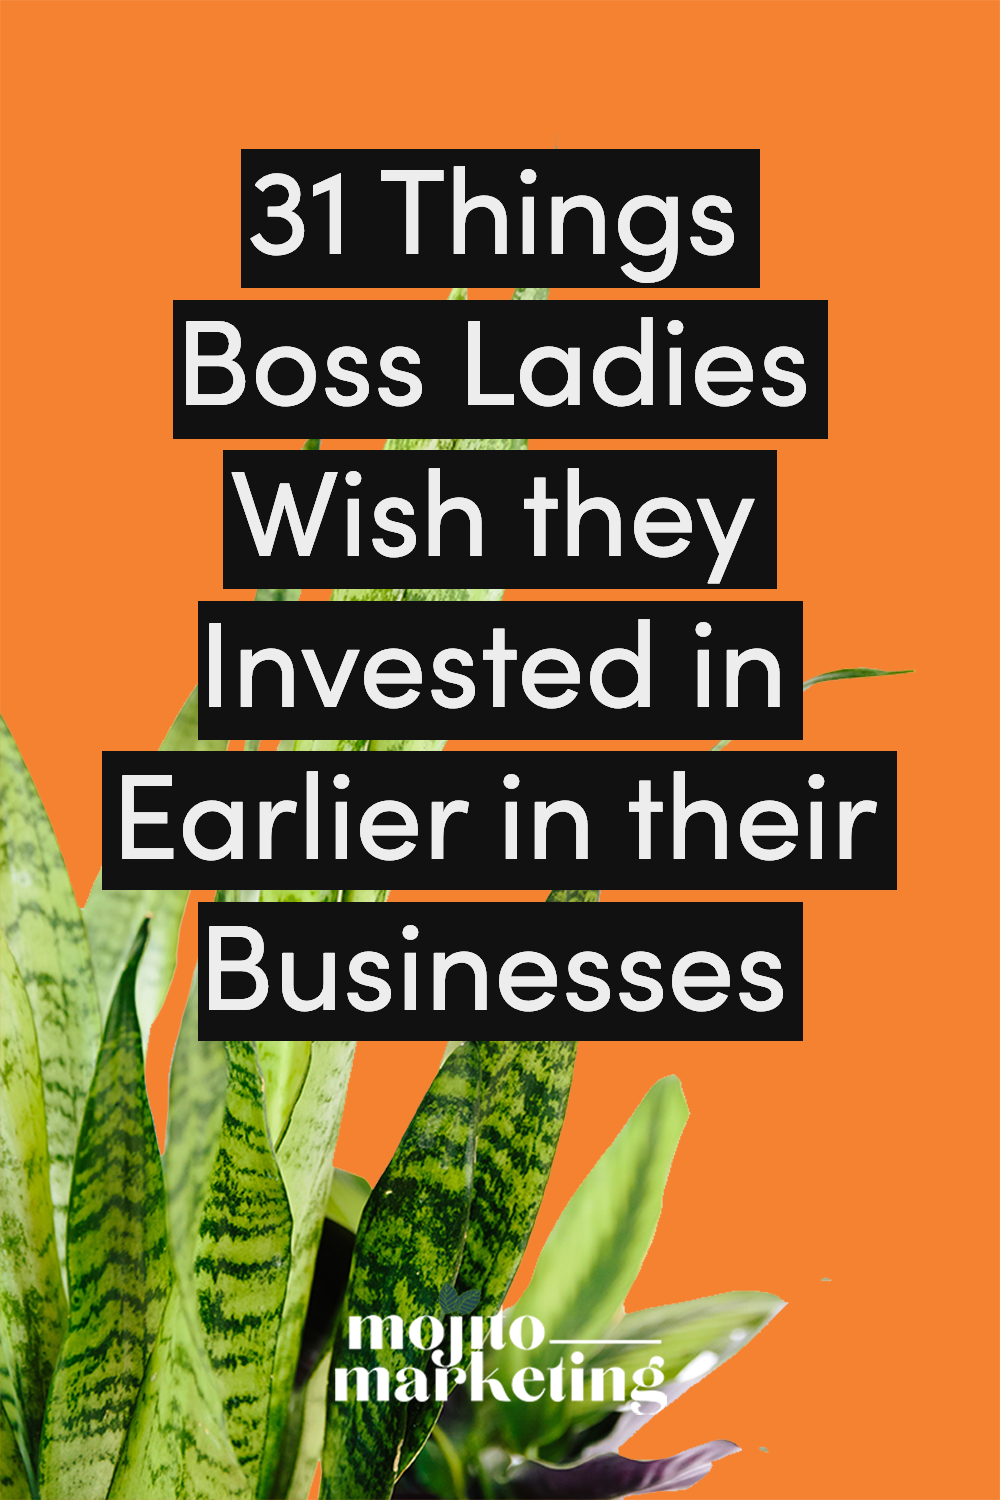 31_Things_Boss_Ladies_Wish_they_Invested_in_Earlier_in_their_Businesses_a.png